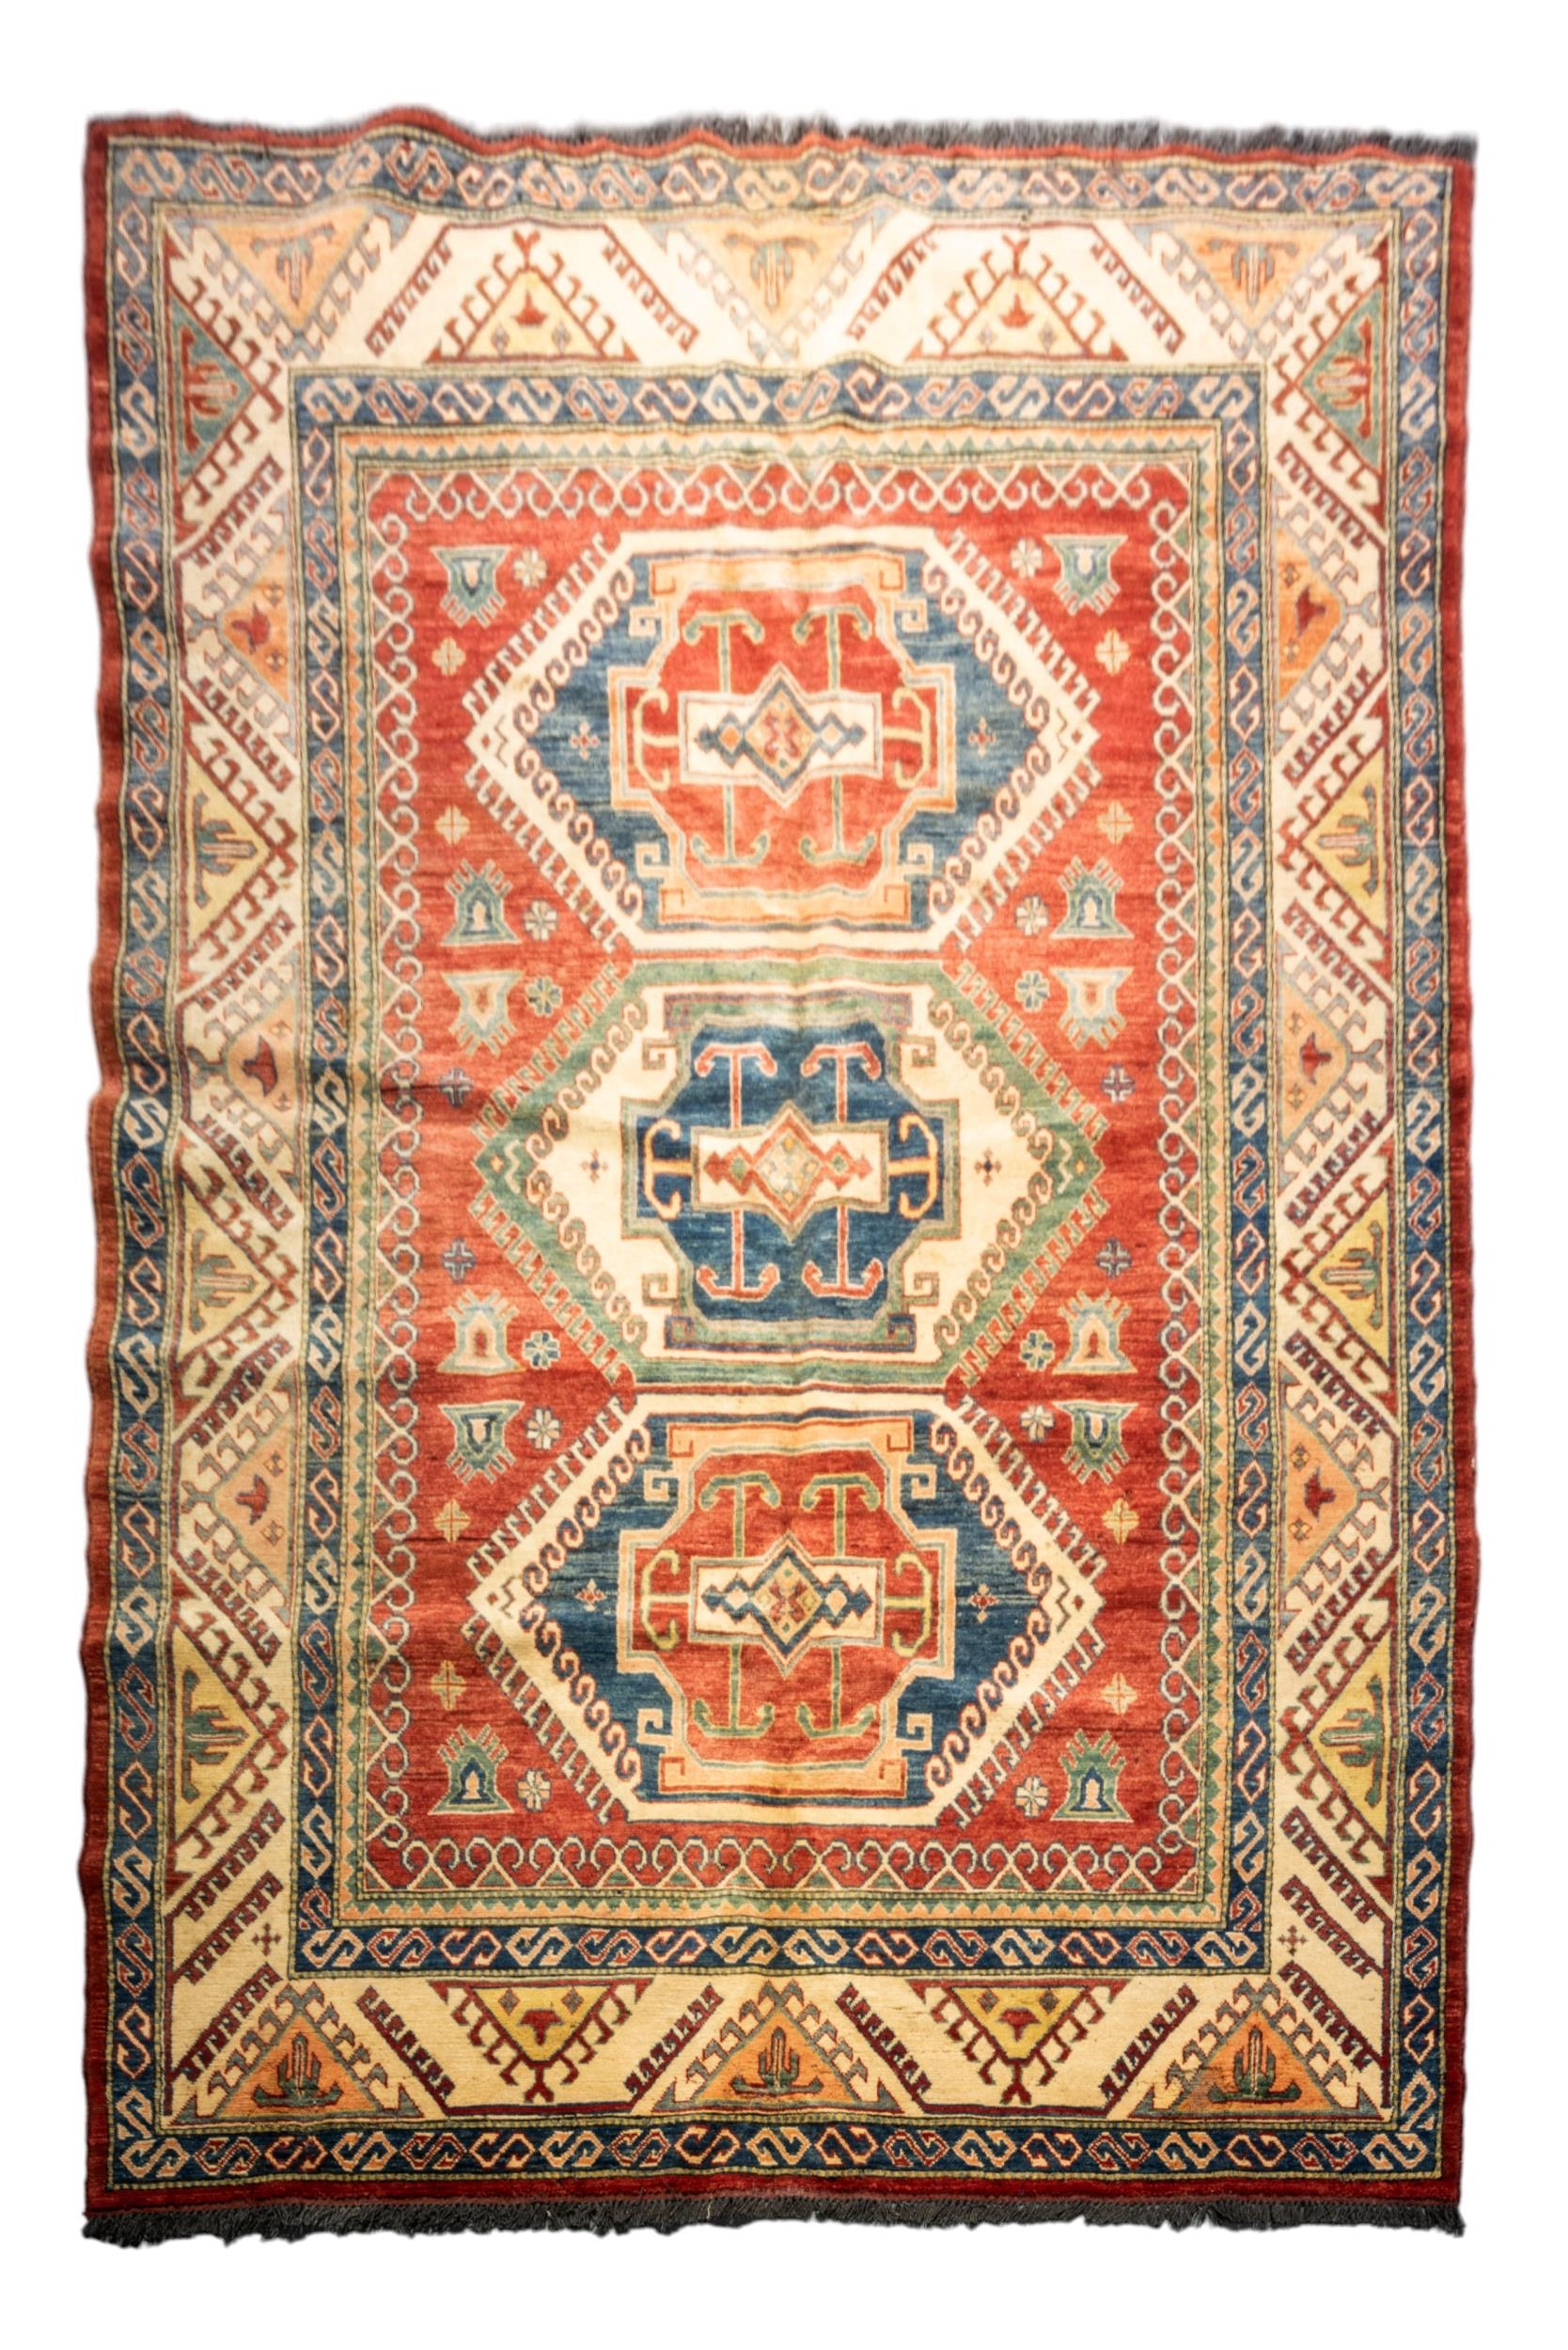 A HAND KNOTTED PERSIAN RUG, MID-LATE 20TH CENTURY, probably Kazhak, small area of damage 332 x 200